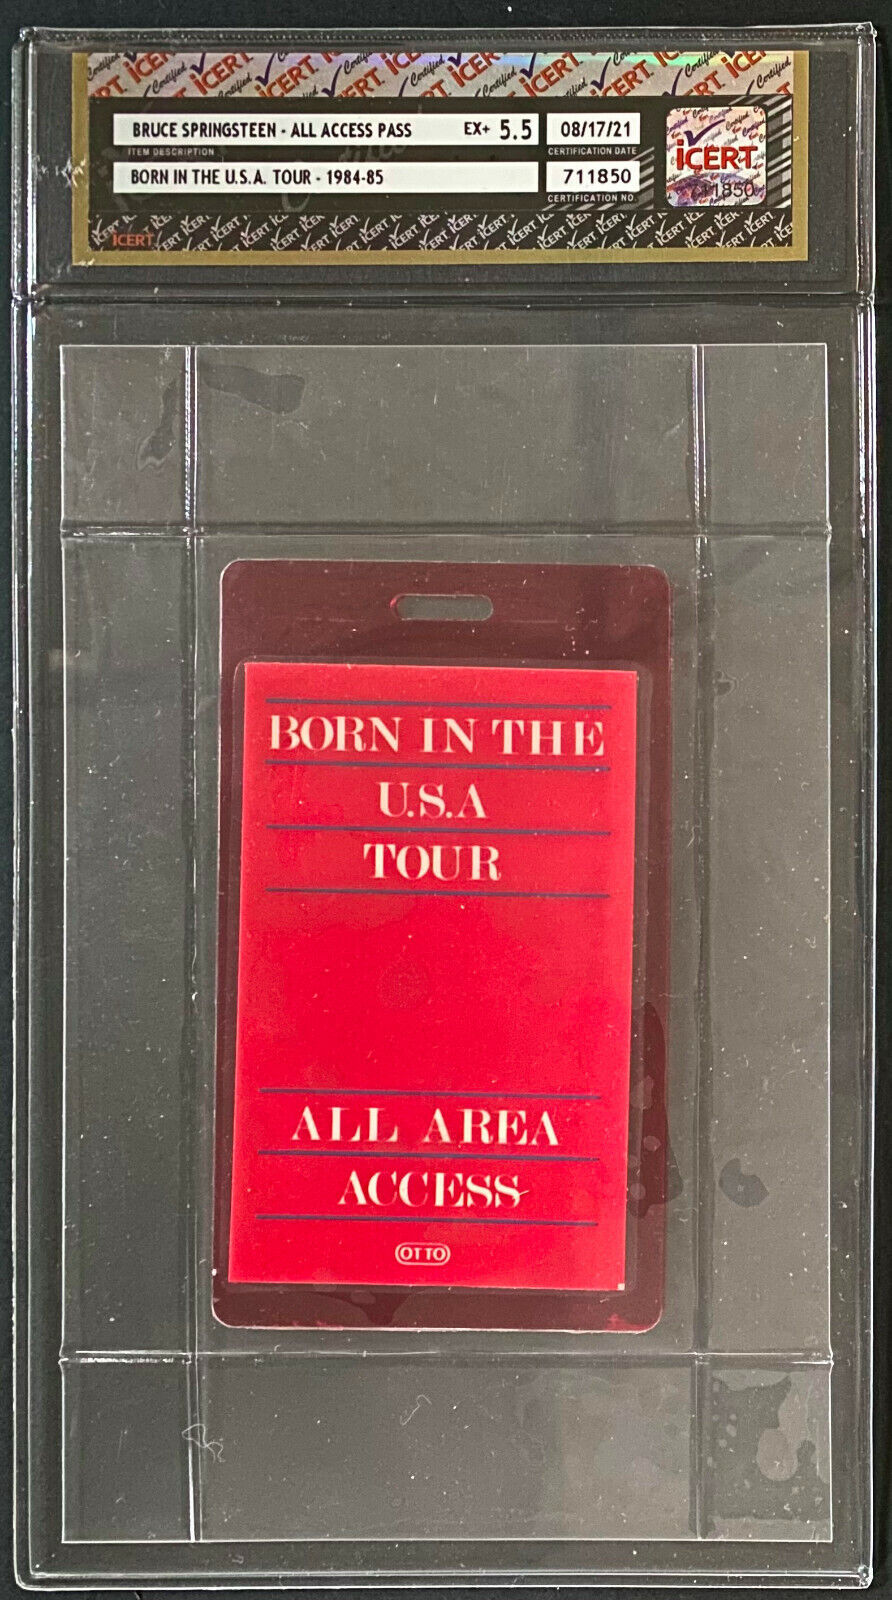 1984 Bruce Springsteen Born In The USA Concert Tour All Access Stage Pass iCert